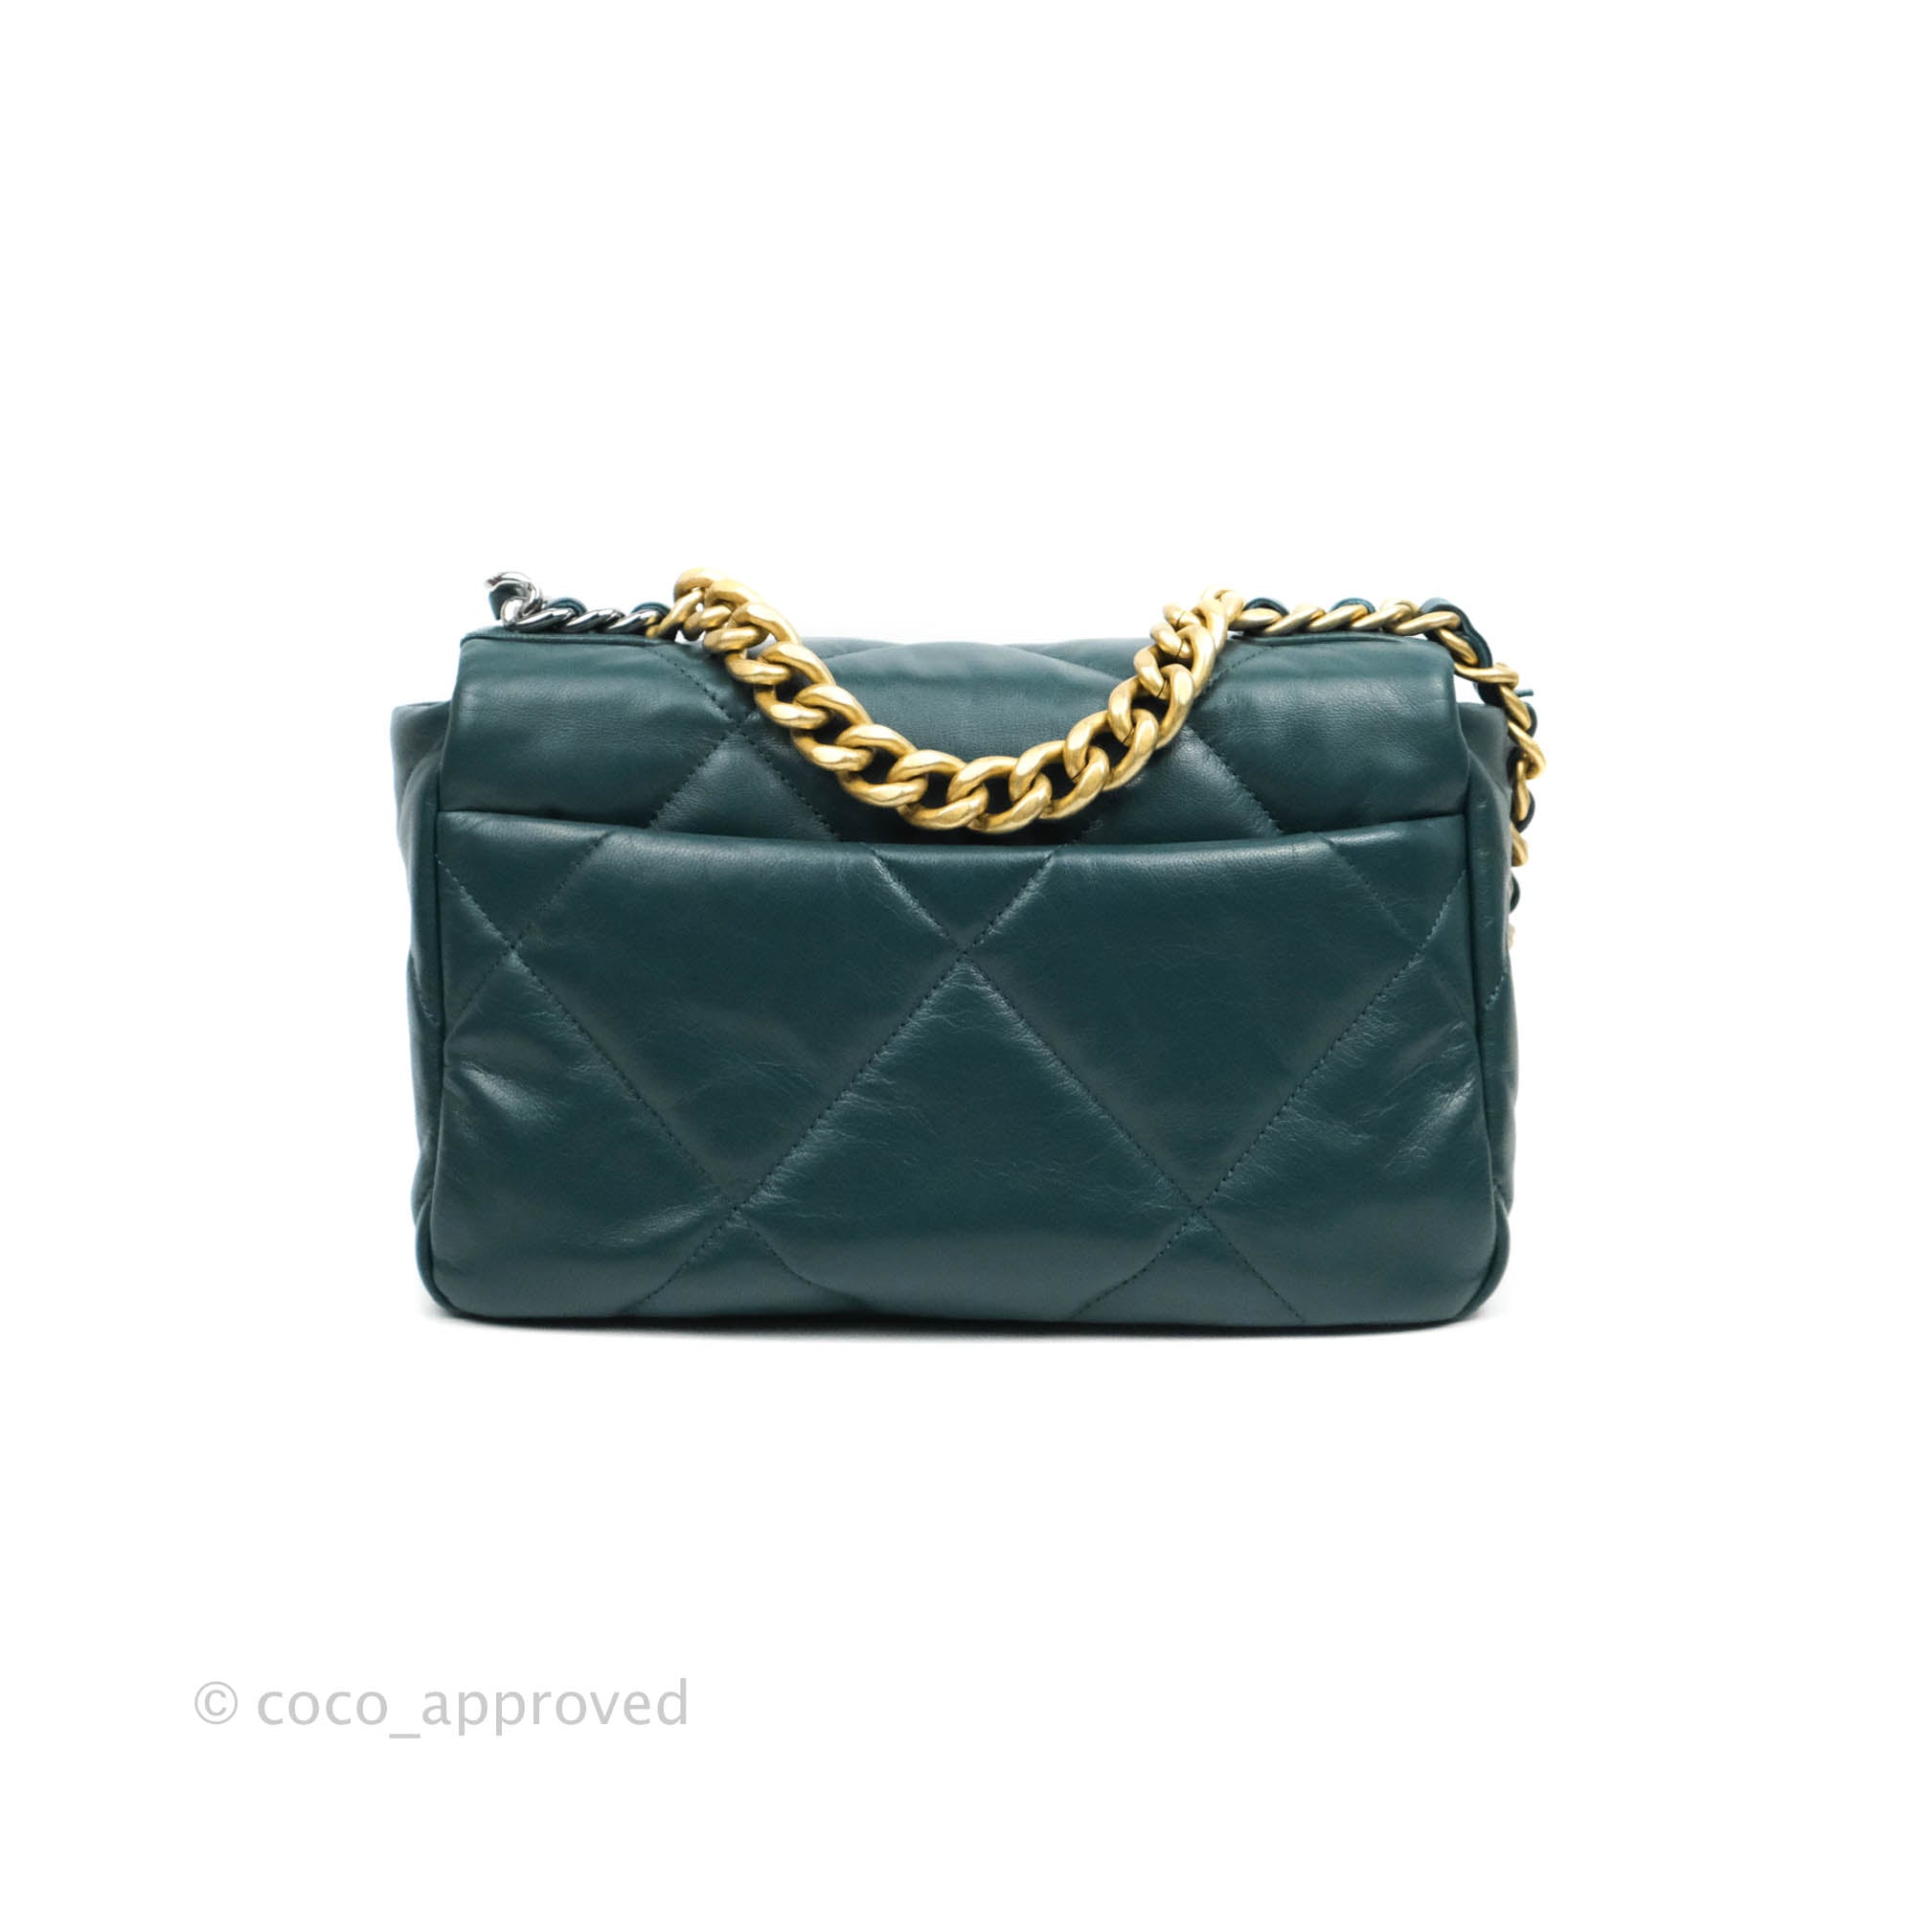 Chanel 19 Small Green Mixed Hardware – Coco Approved Studio